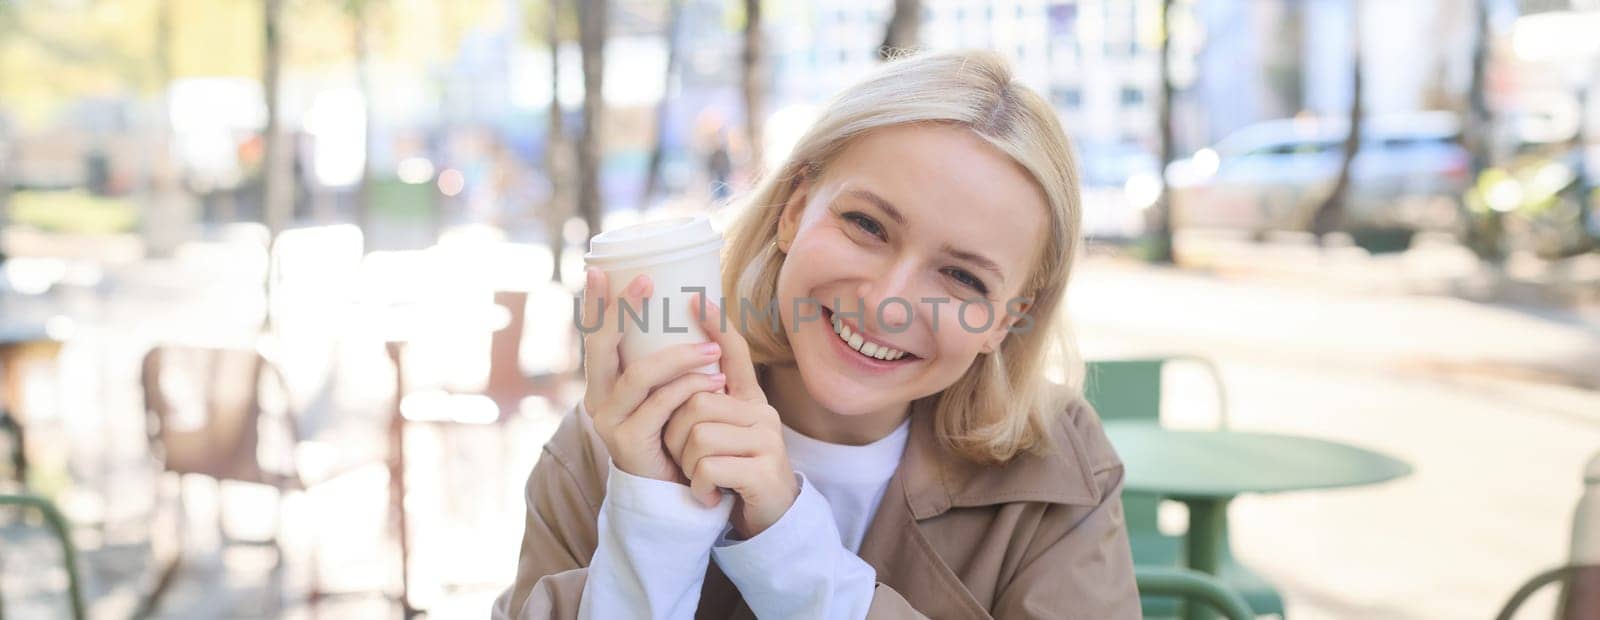 Close up portrait of smiling blonde woman, university student, holding cup of coffee, warming up her hands on chilly autumn day, sitting in outdoor cafe, laughing at camera.